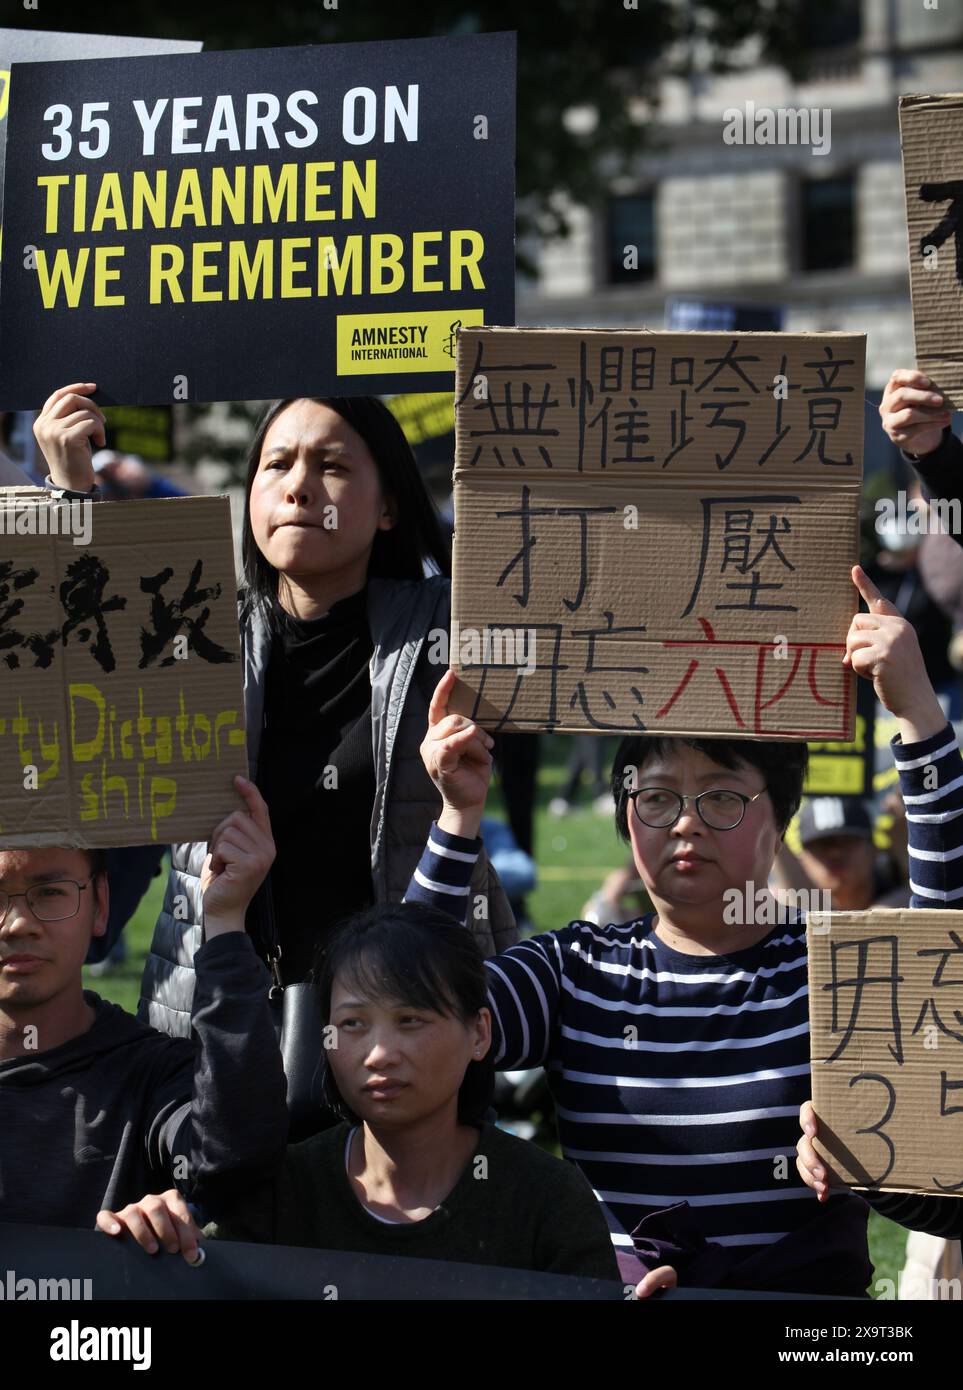 June 2, 2024, London, England, UK: Protesters gather together holding signs supporting their position some in Mandarin, during the demonstration in Parliament Square. The event commemorated the1989 student-led protests and the Chinese government's bloody crackdown on 4 June, as well as protest against China's current clampdown on freedom of speech - including its increasing repression of Tibetans and Uyghurs, its crushing of dissent in Hong Kong, and the intimidation of Chinese and Hong Kong students in the UK, Europe and North America. Thirty-five years on, the Chinese authorities still ban i Stock Photo